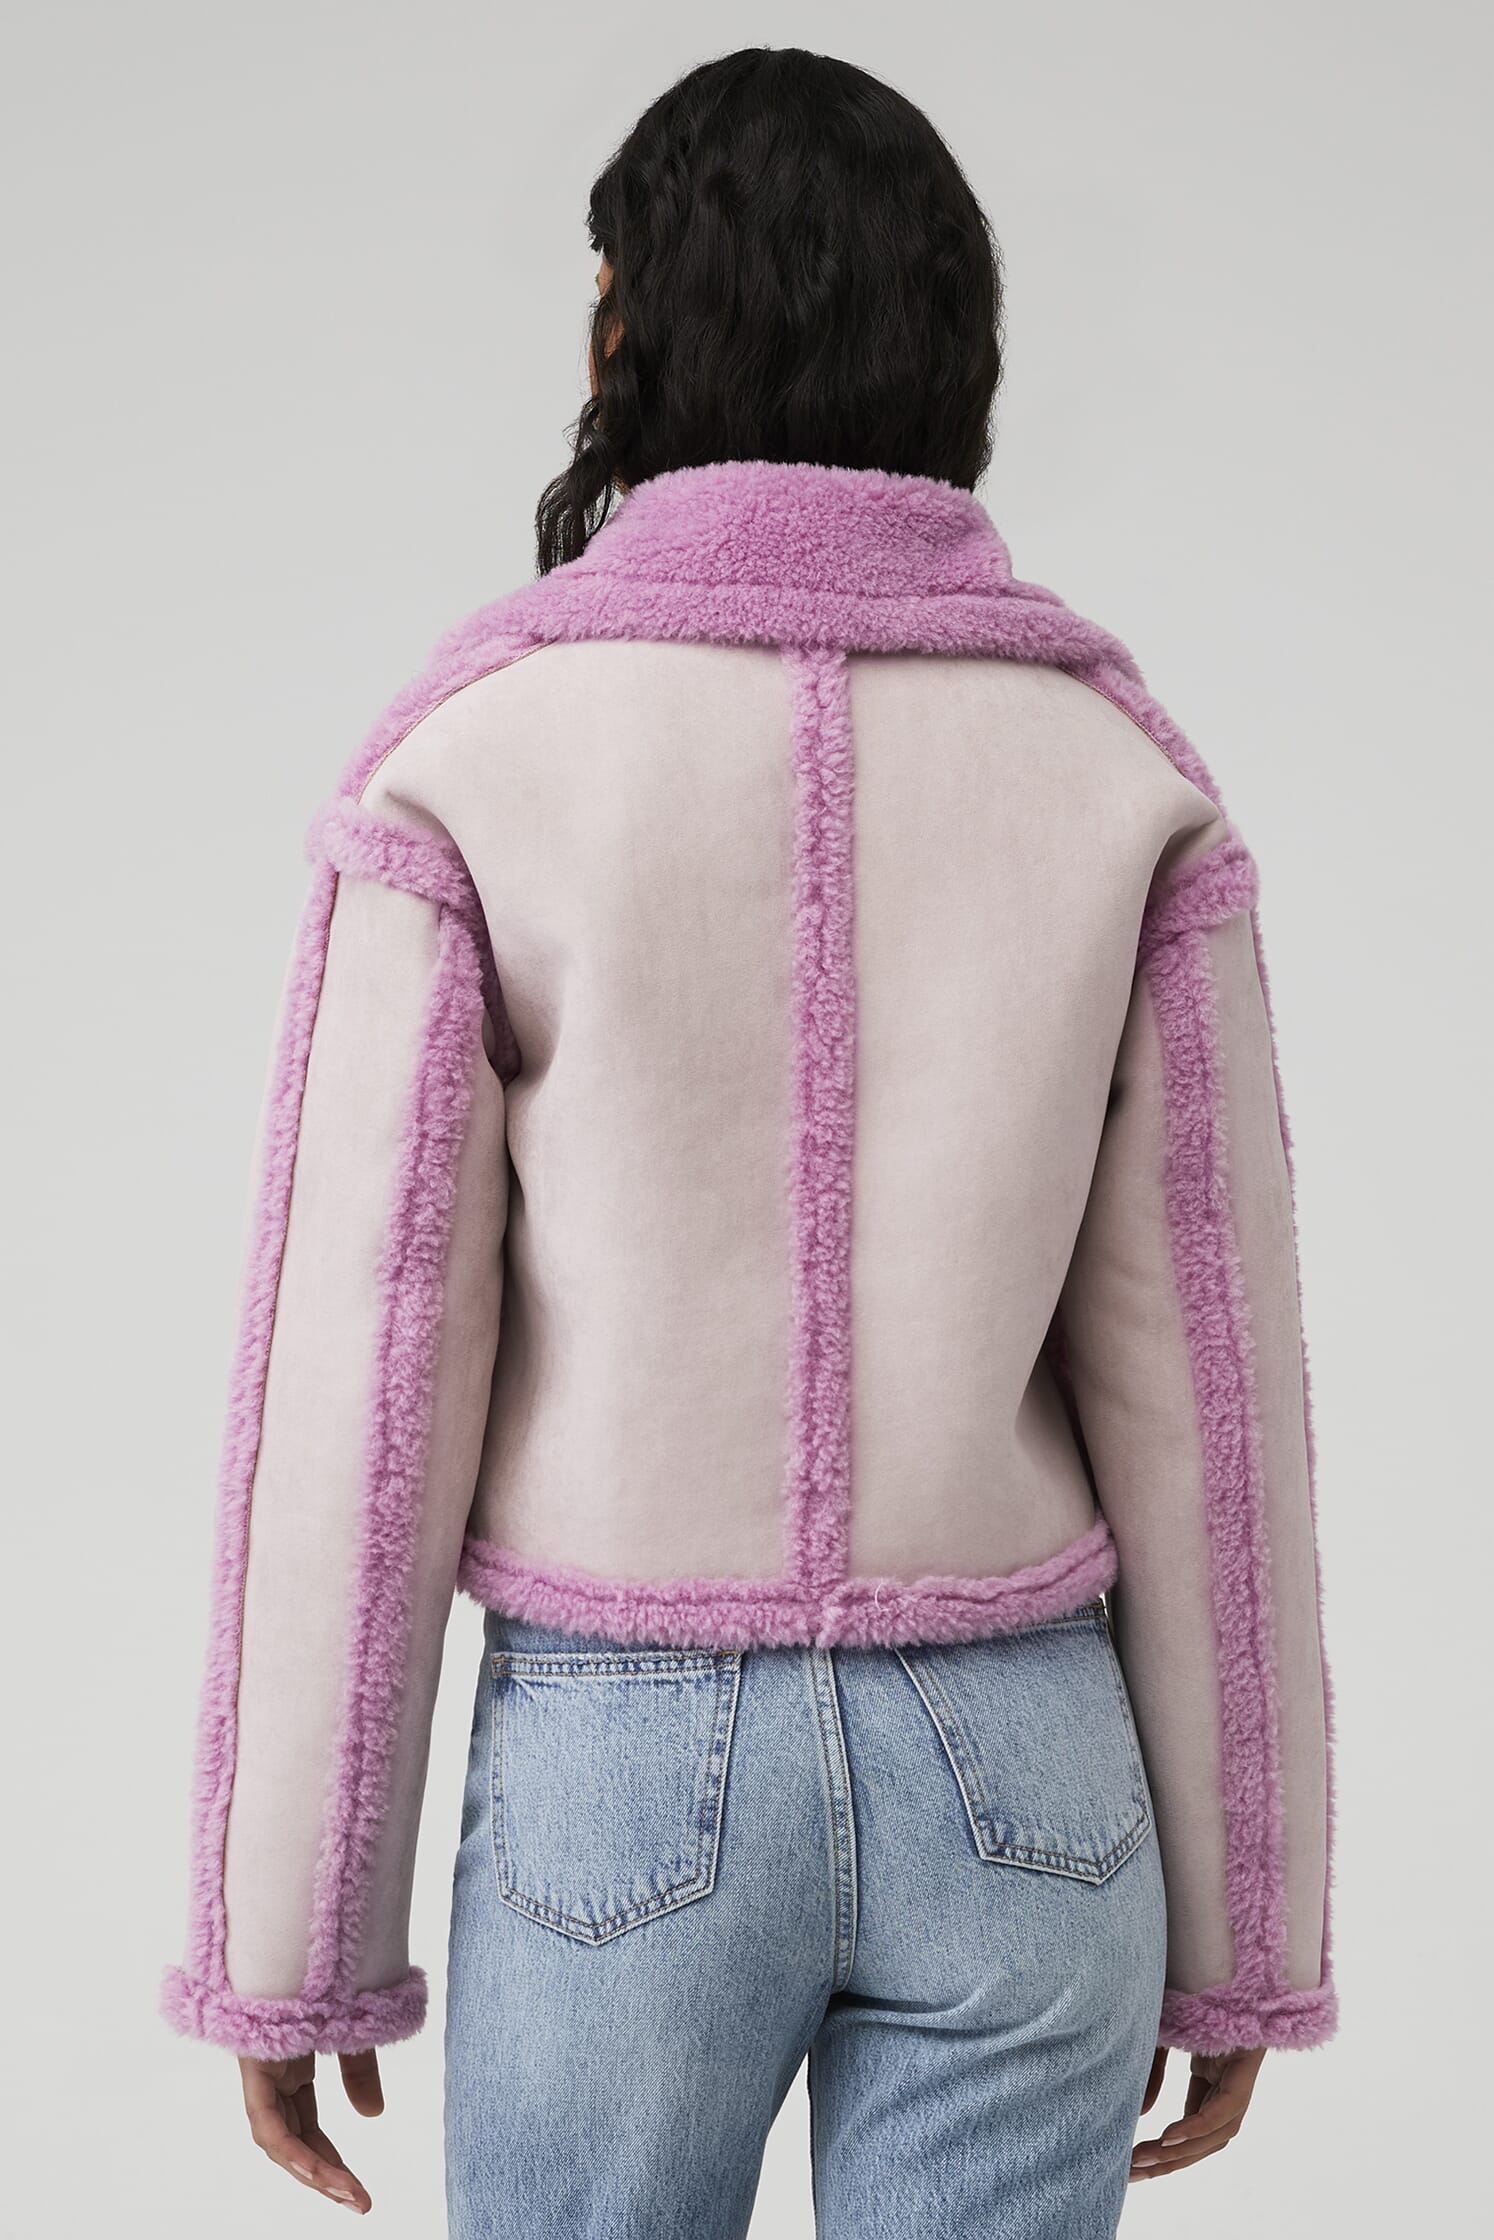 OW Collection Berlin Faux Fur Jacket in Lavender